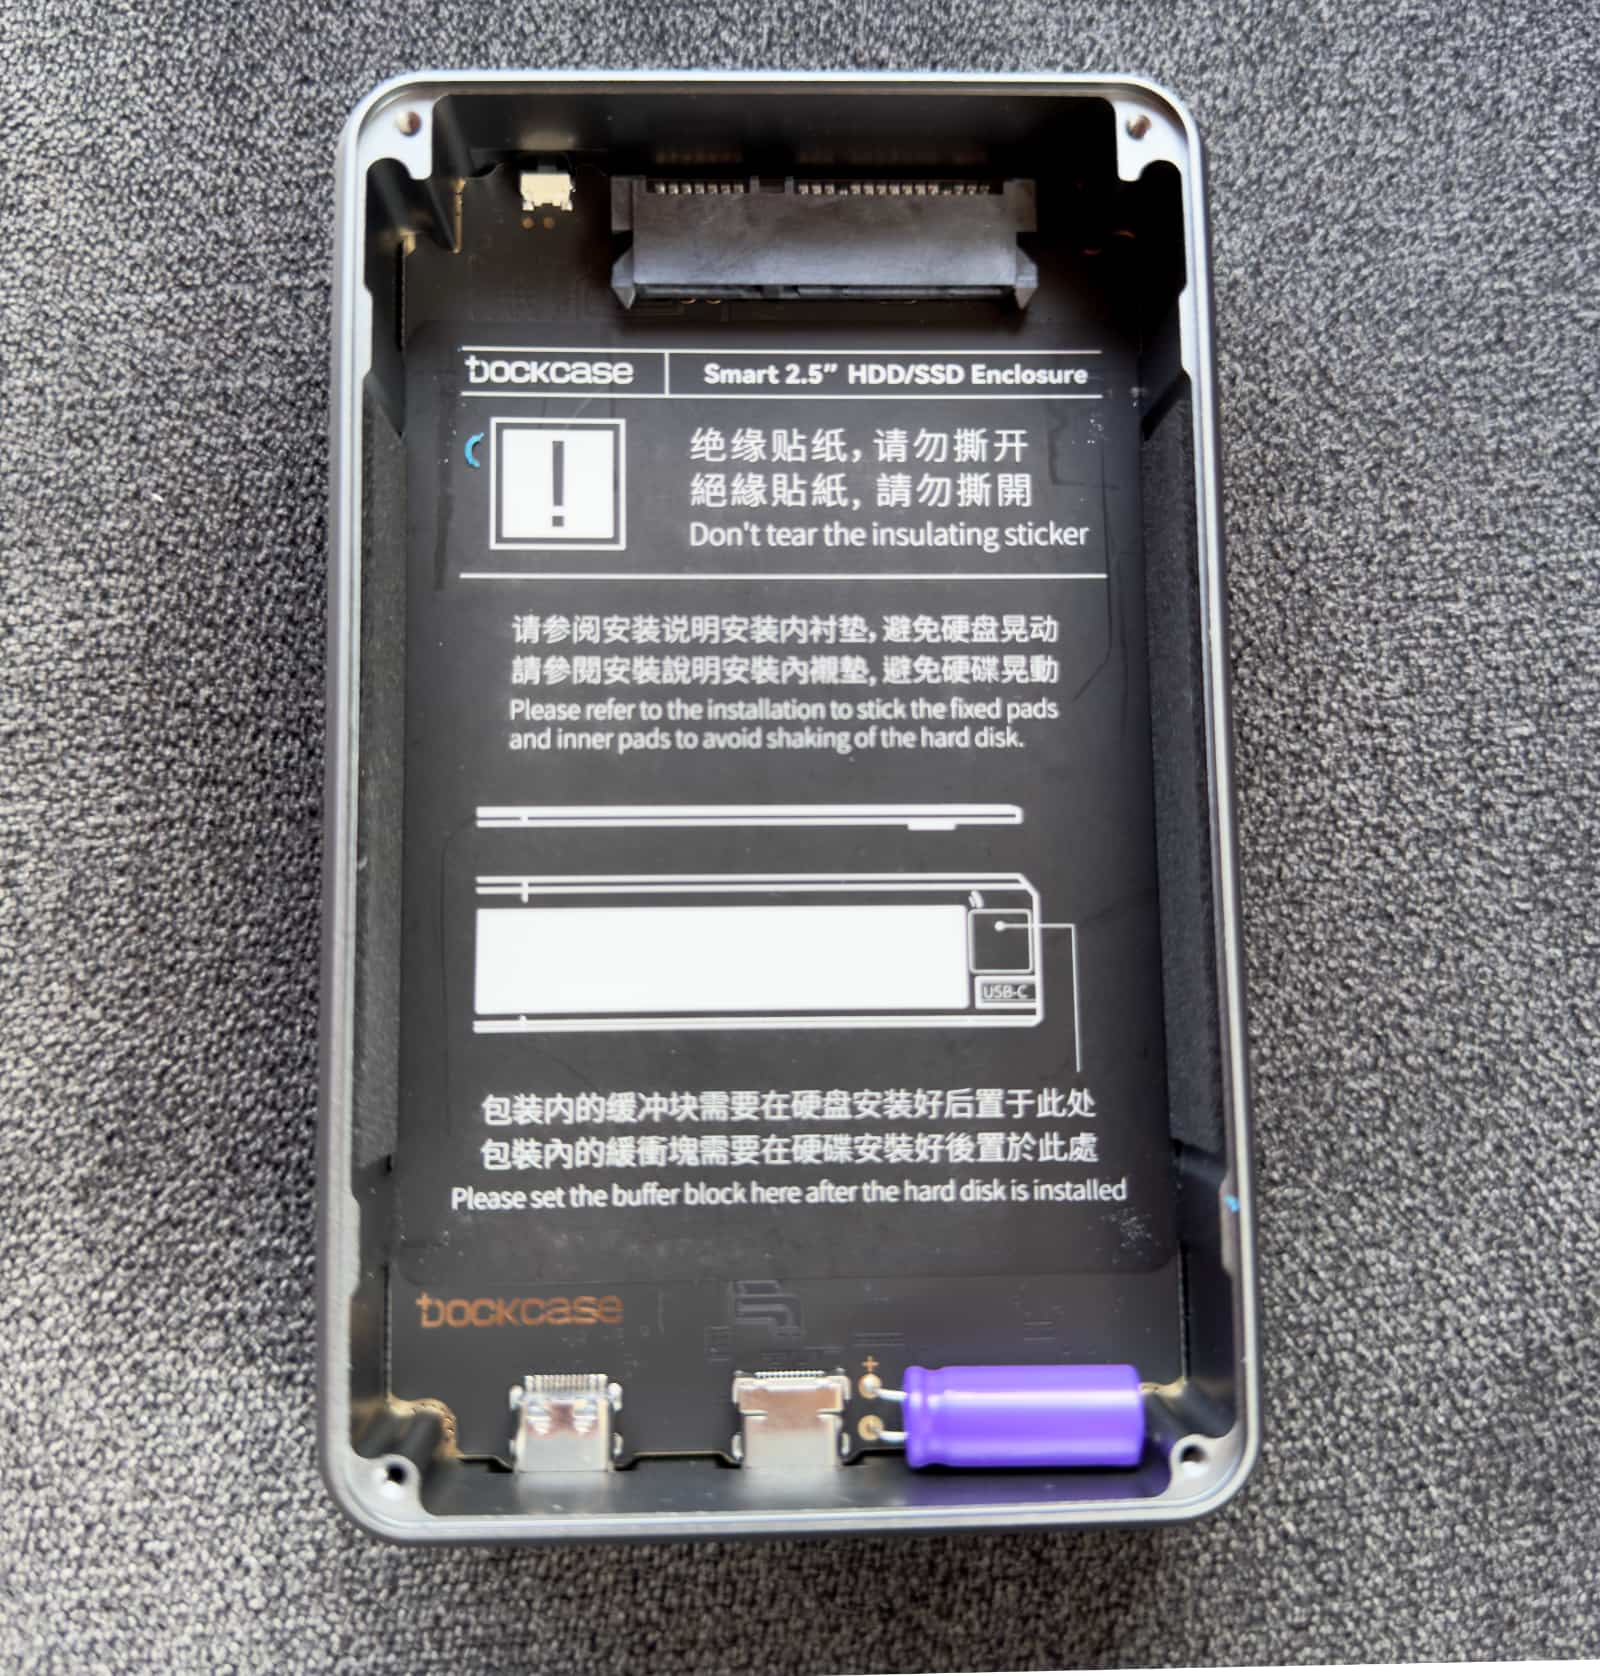 A top-down view of the DockCase external storage enclosure with the metal cover removed, exposing an insulating sticker, SATA III interface and capacitor on the inside